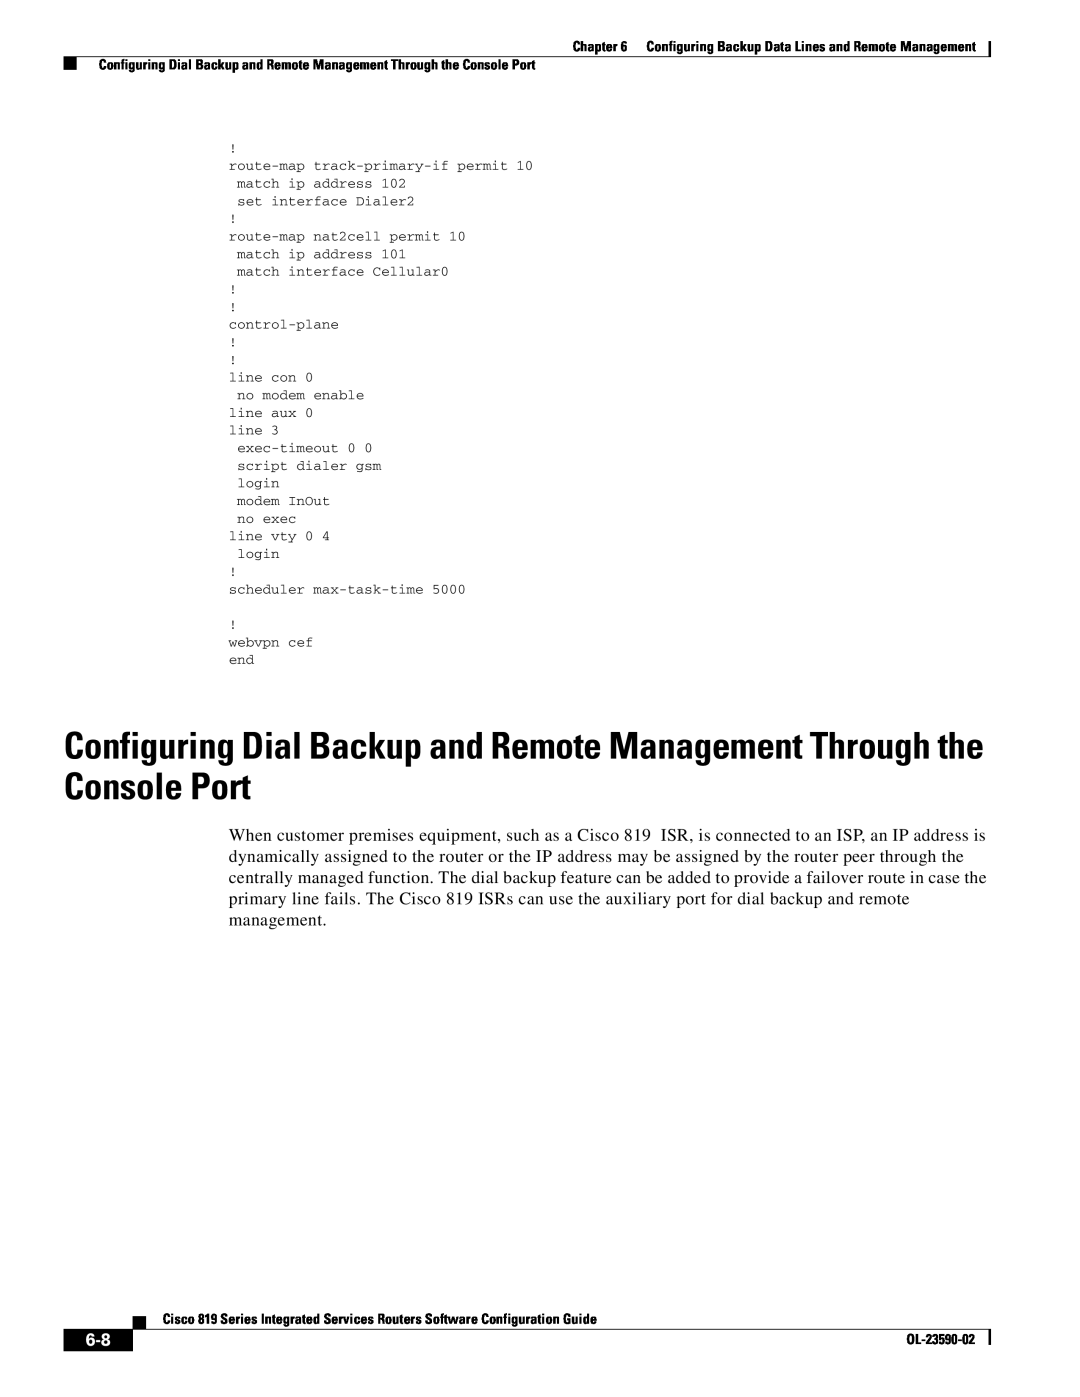 Cisco Systems C819GUK9 manual route-map track-primary-if permit 10 match ip address, set interface Dialer2, control-plane 